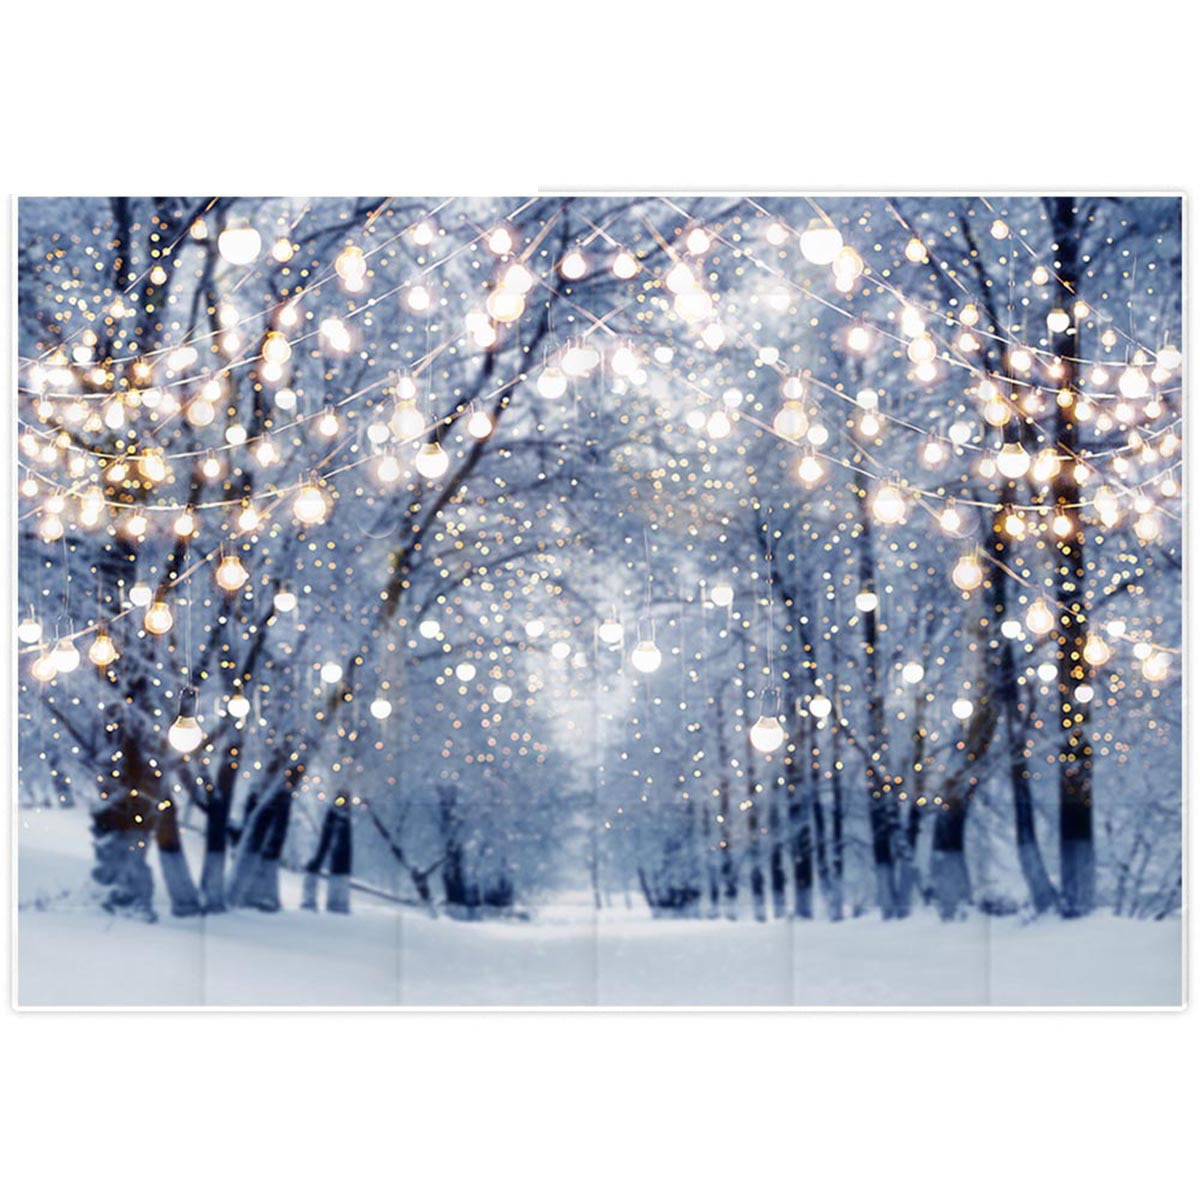 Allenjoy 7x5ft Winter Christmas Photography Backdrop Glitter Spot Xmas Green Pine Trees Snowy Wonderland Background for Kids Newborn Baby Shower Birthday Party Decor Banner Portrait Photo Booth Props 